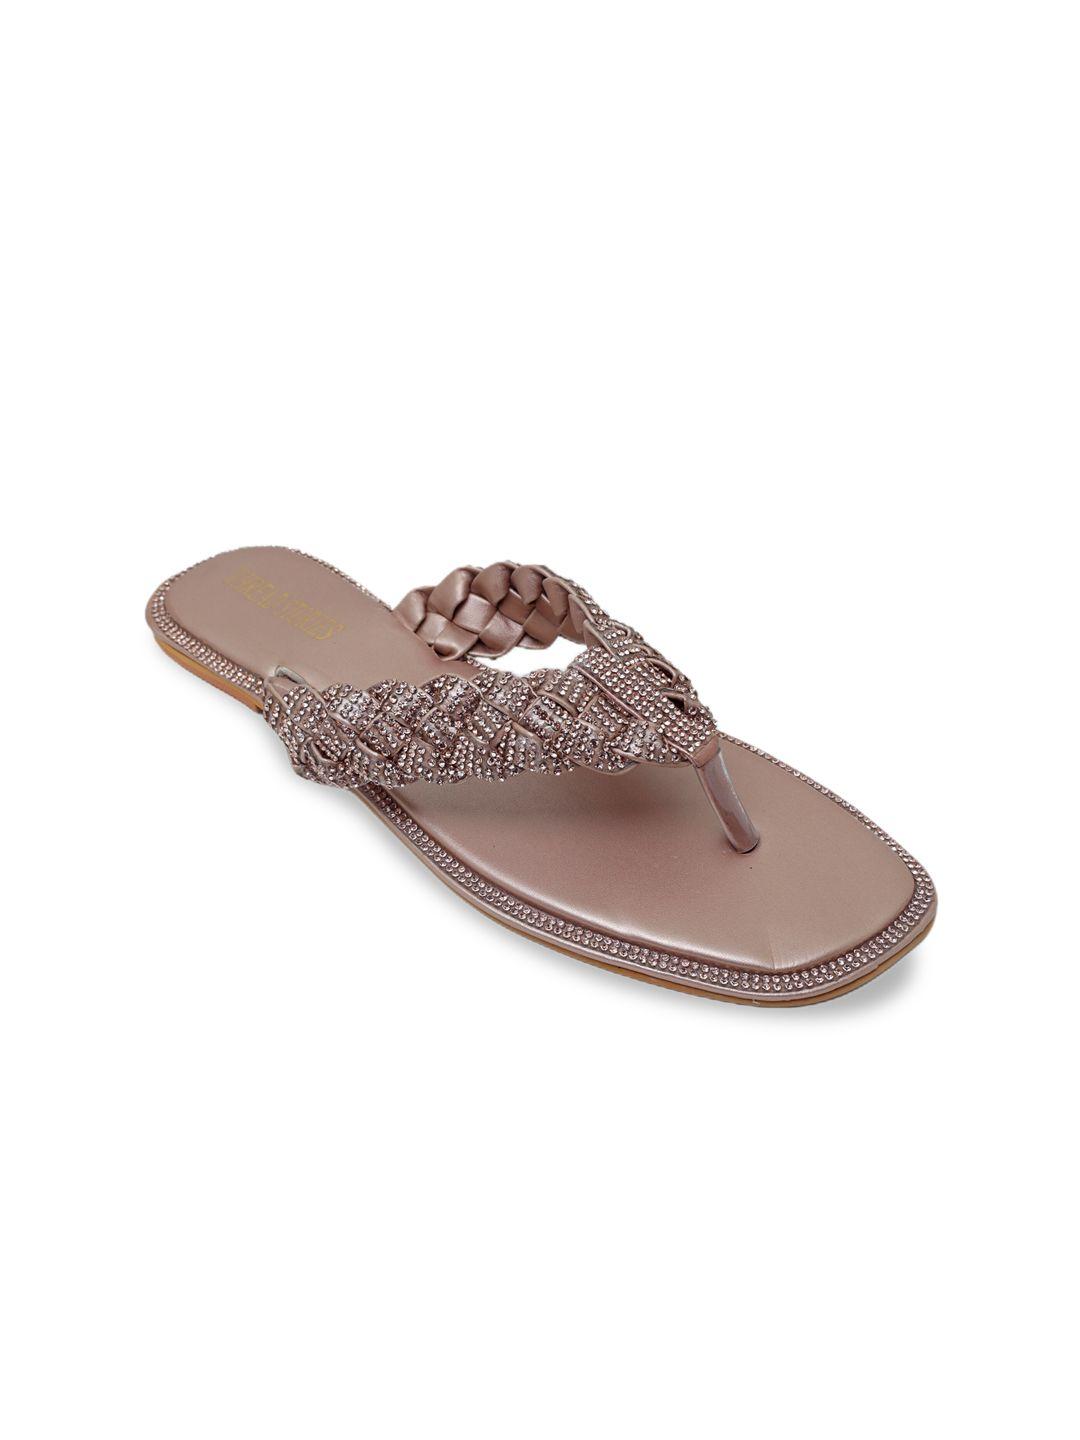 thread stories braided embellished open toe flats